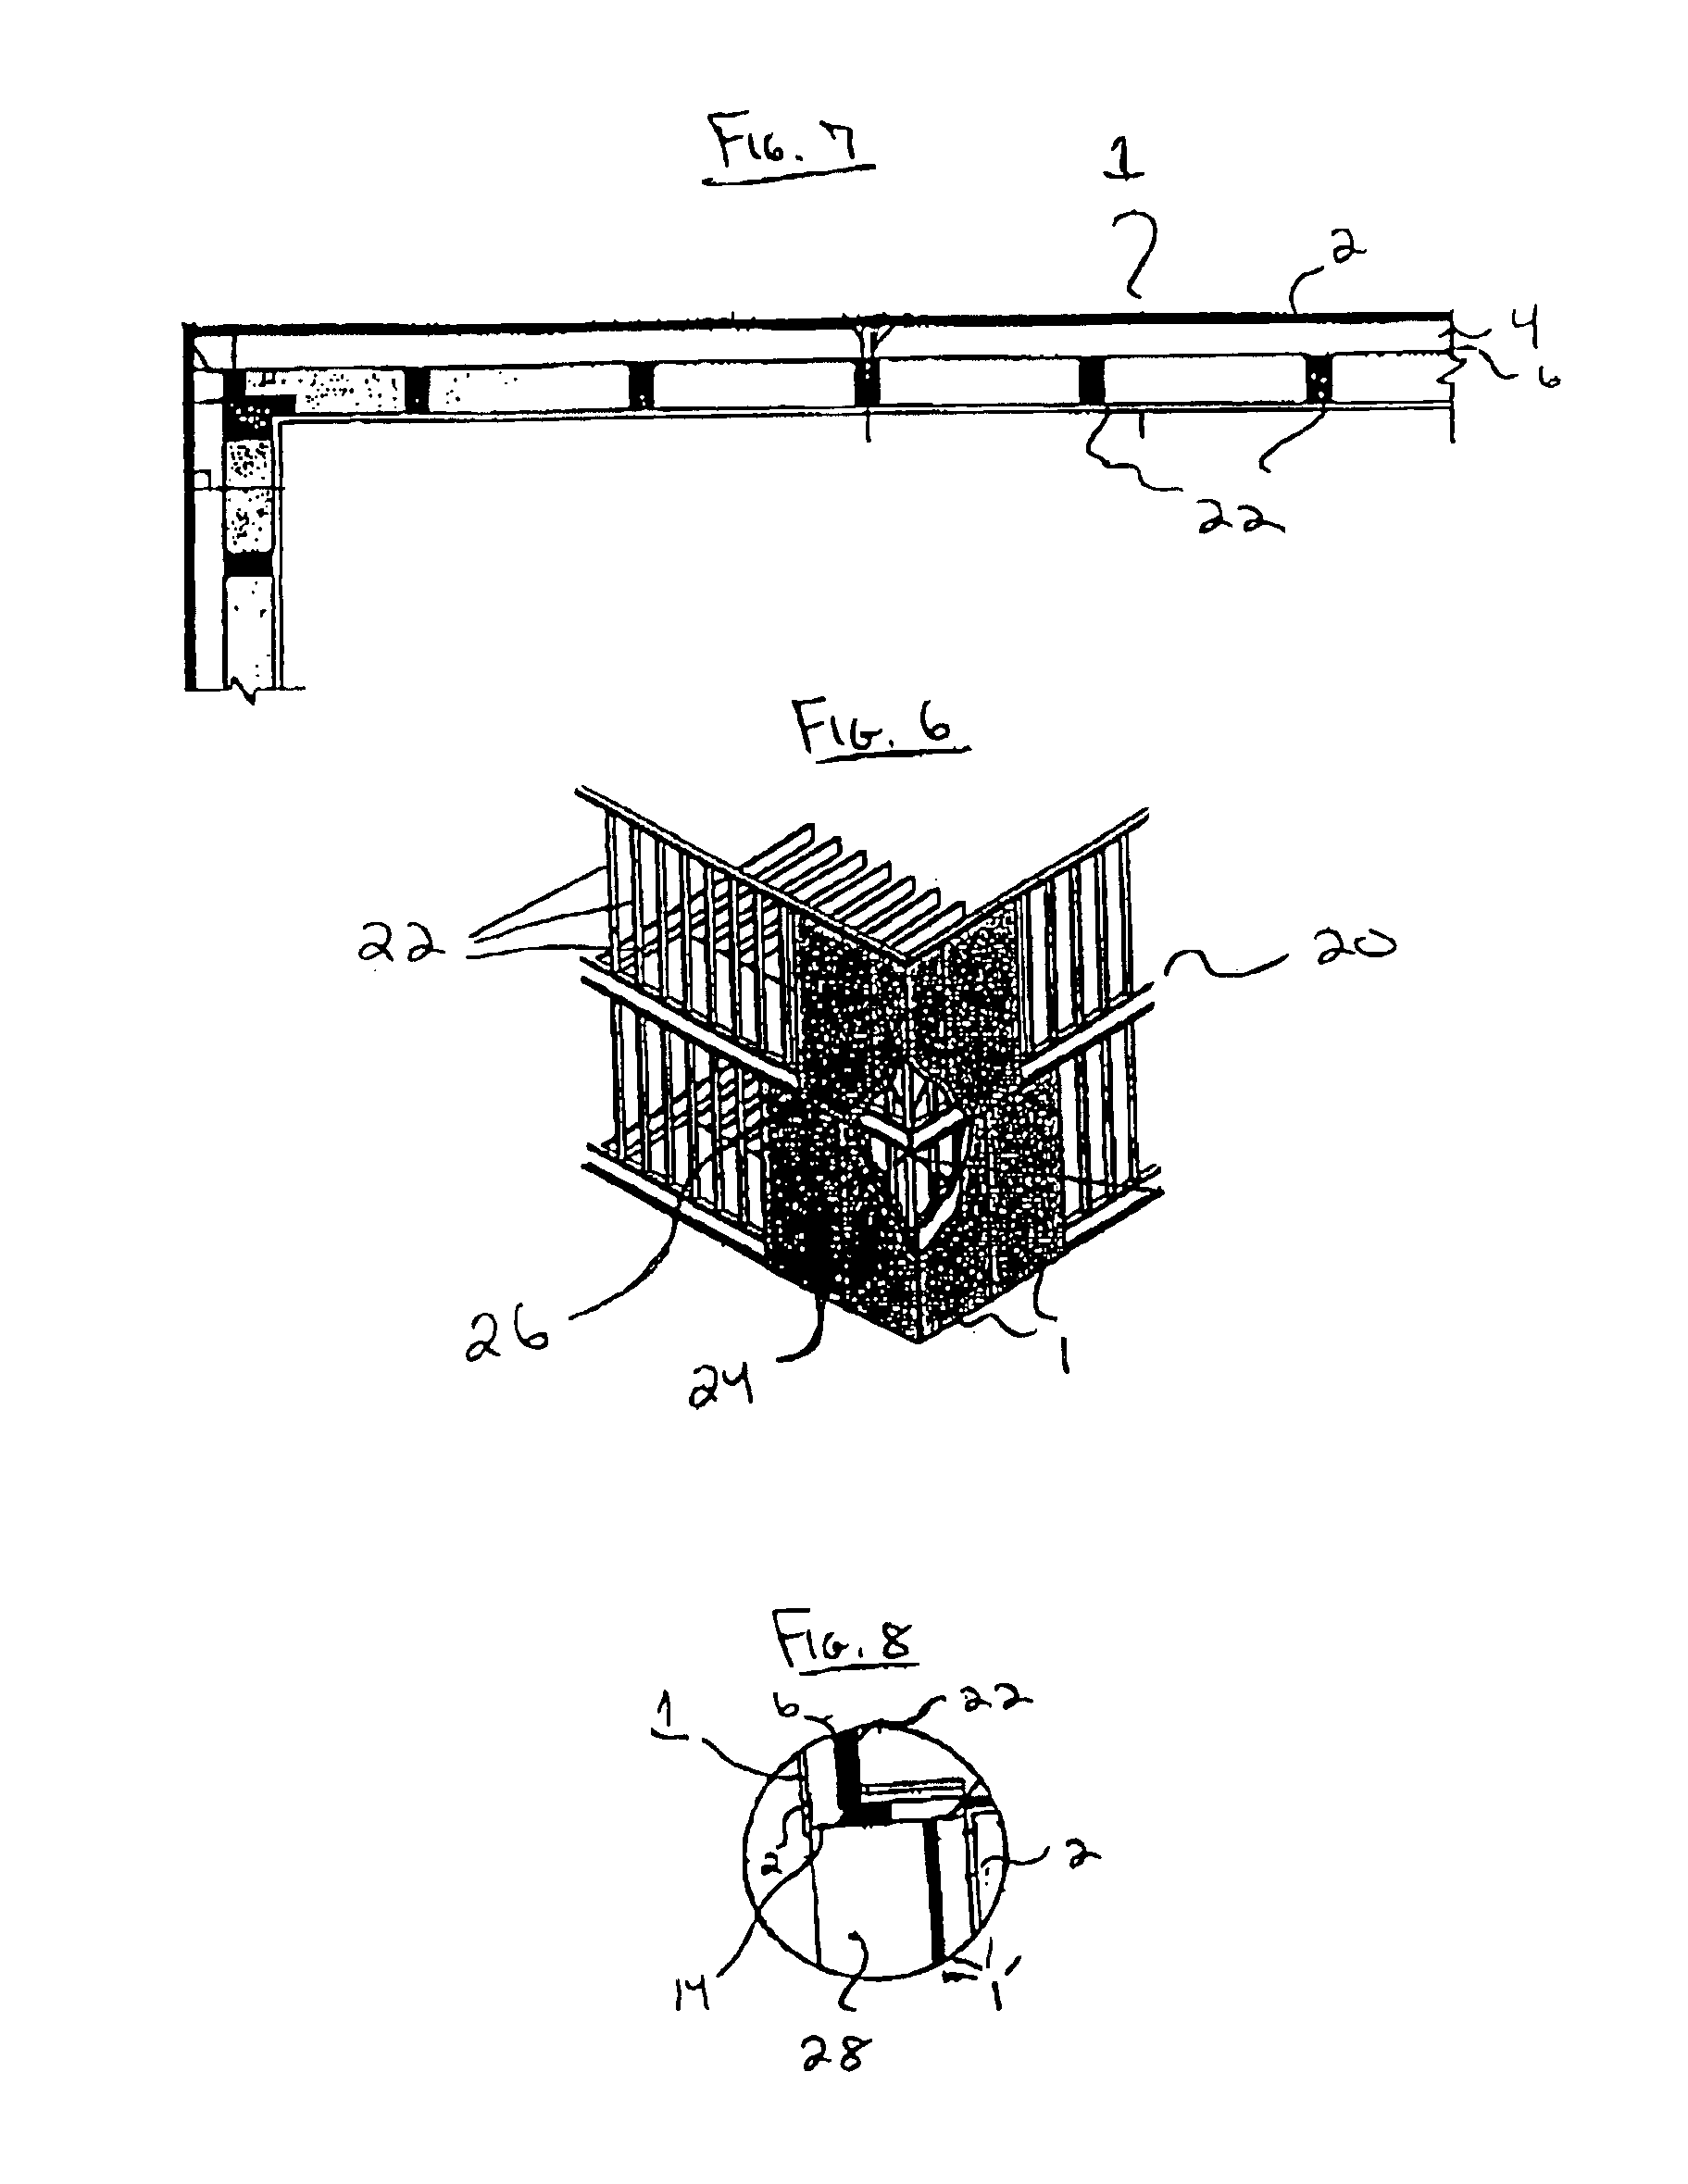 Prefabricated sealed composite insulating panel and method of utilizing same to insulate a building